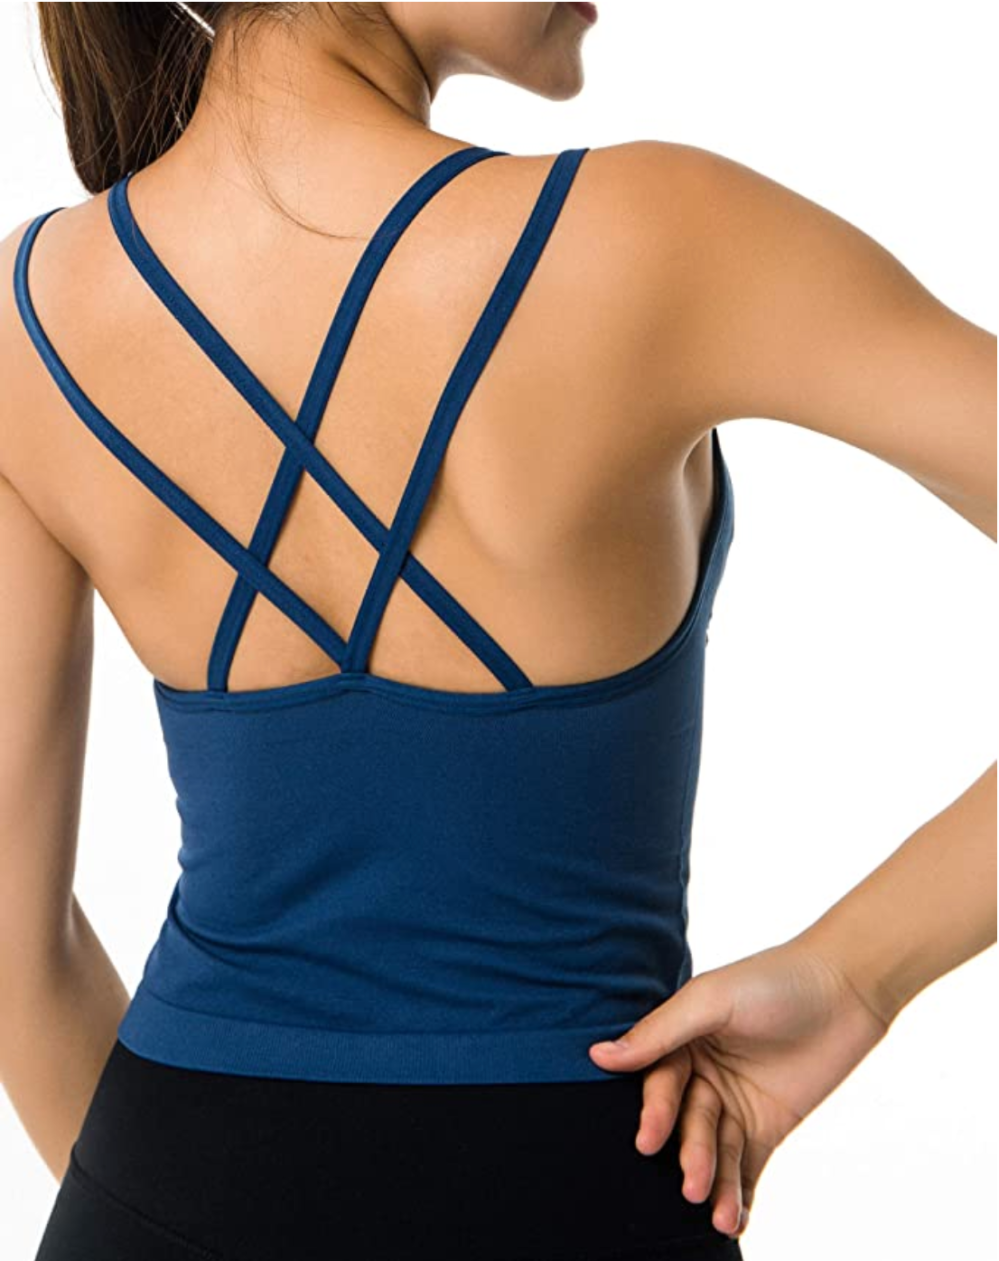 AKAMC Women's Medium Support Cross Back Wirefree Removable Cups Yoga Sport Bra